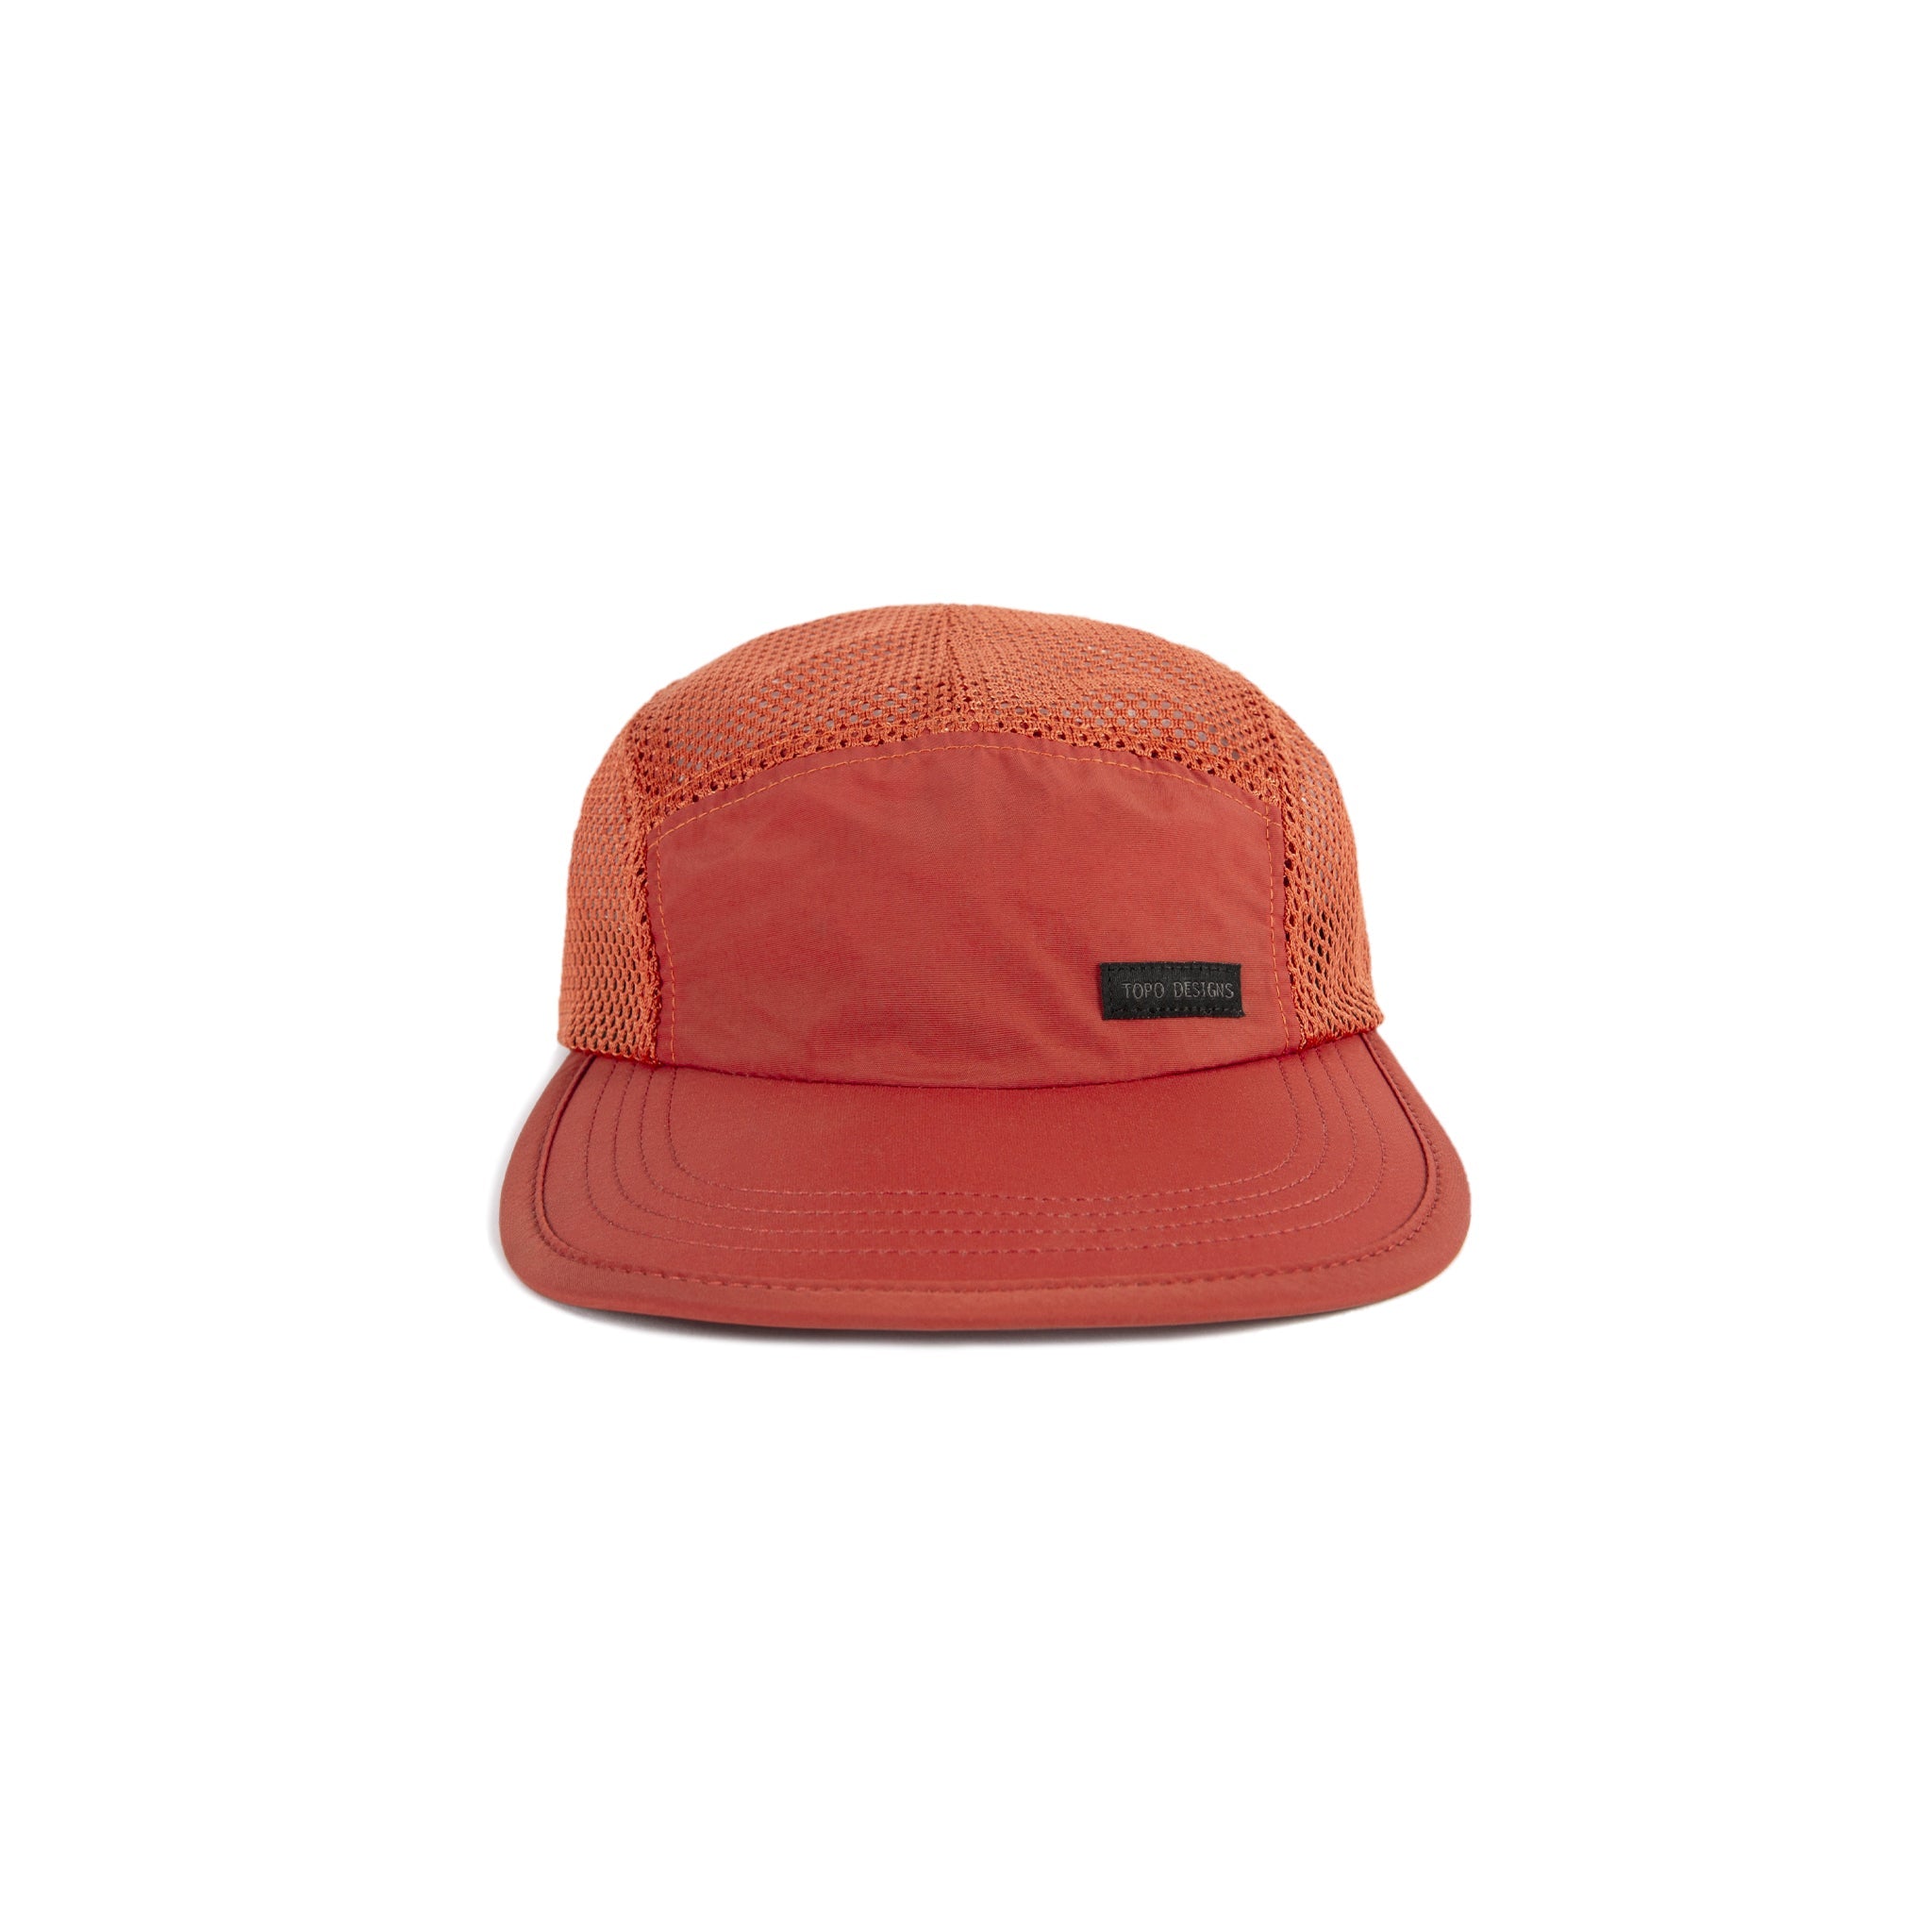 Topo Designs Global mesh back Hat in "Clay" orange. Unstructured 5-panel flexible brim packable hat.